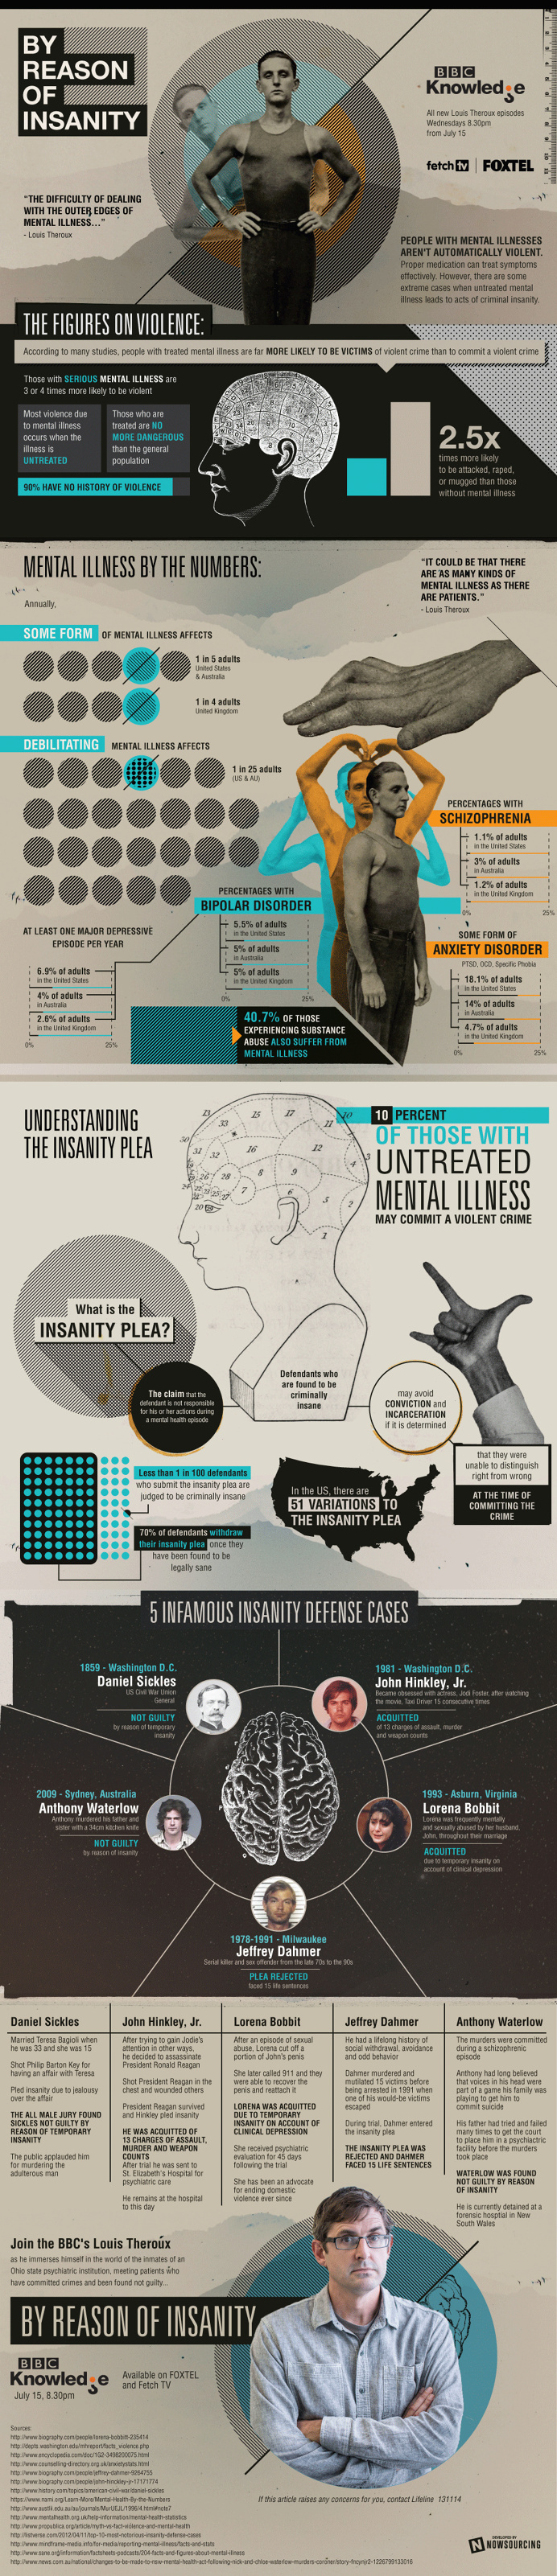 Pleading #insanity isn't always successful. Learn more about the #insanity plea from this #infographic!